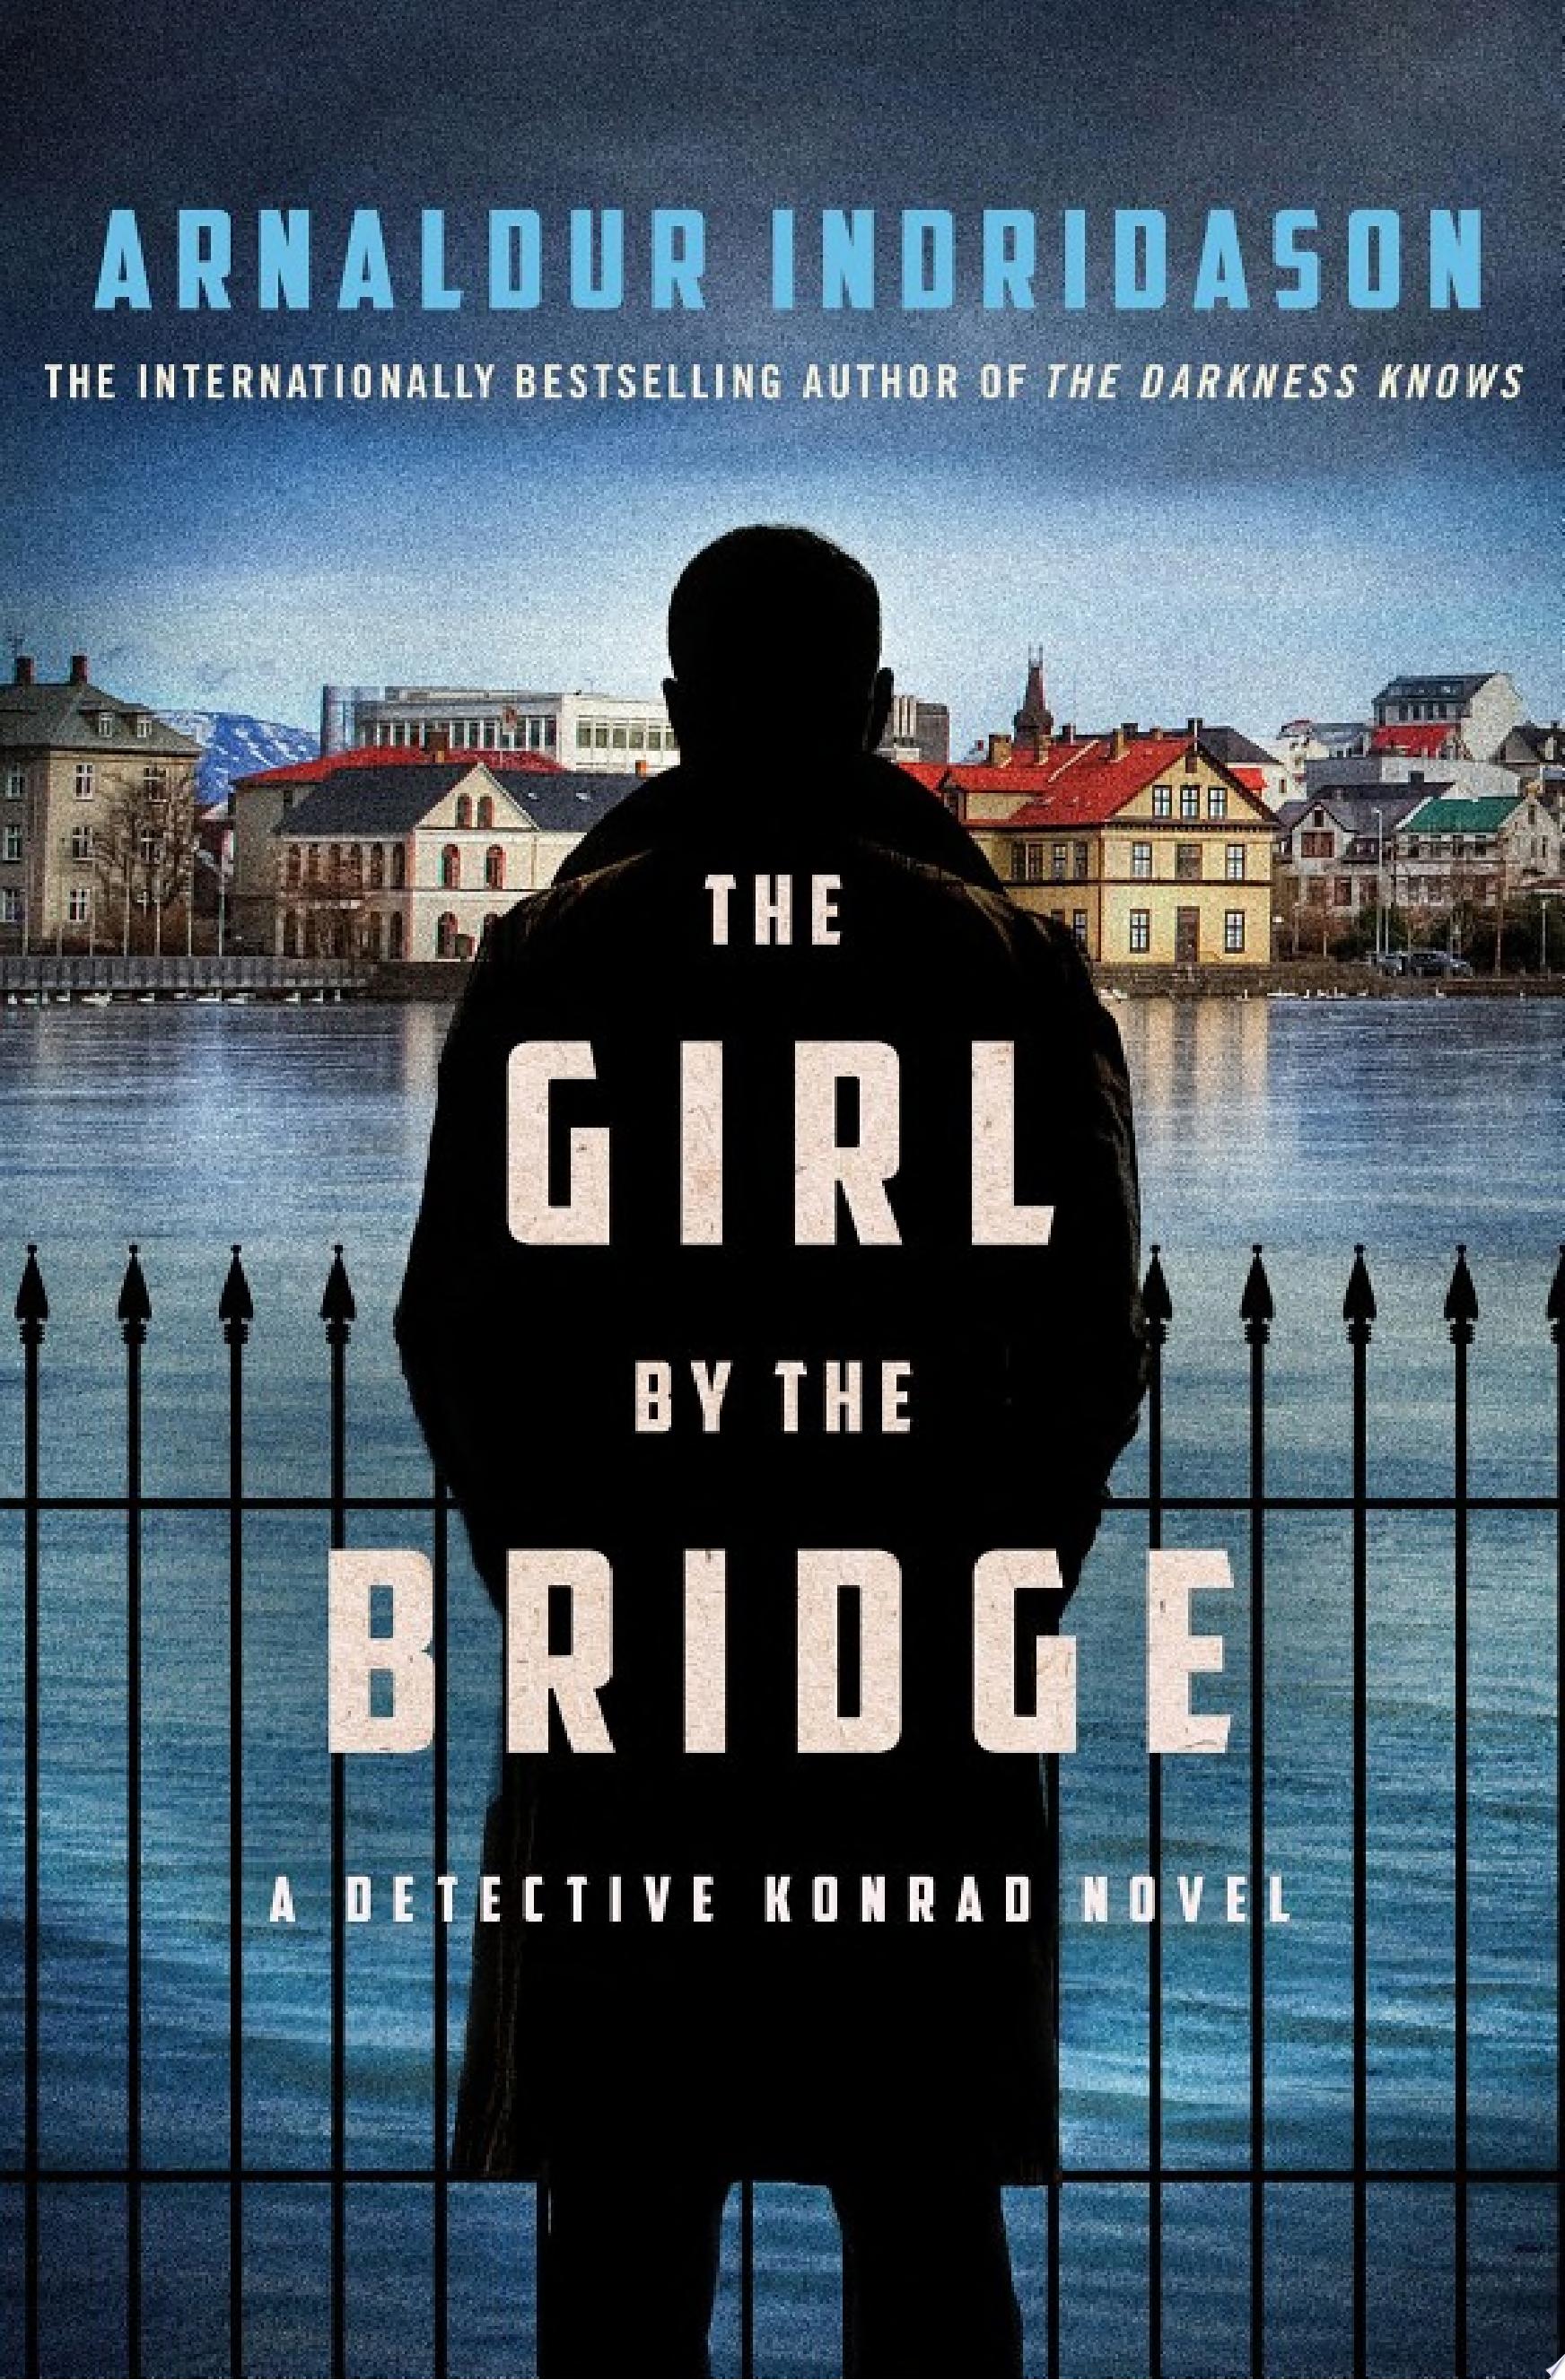 Image for "The Girl by the Bridge"